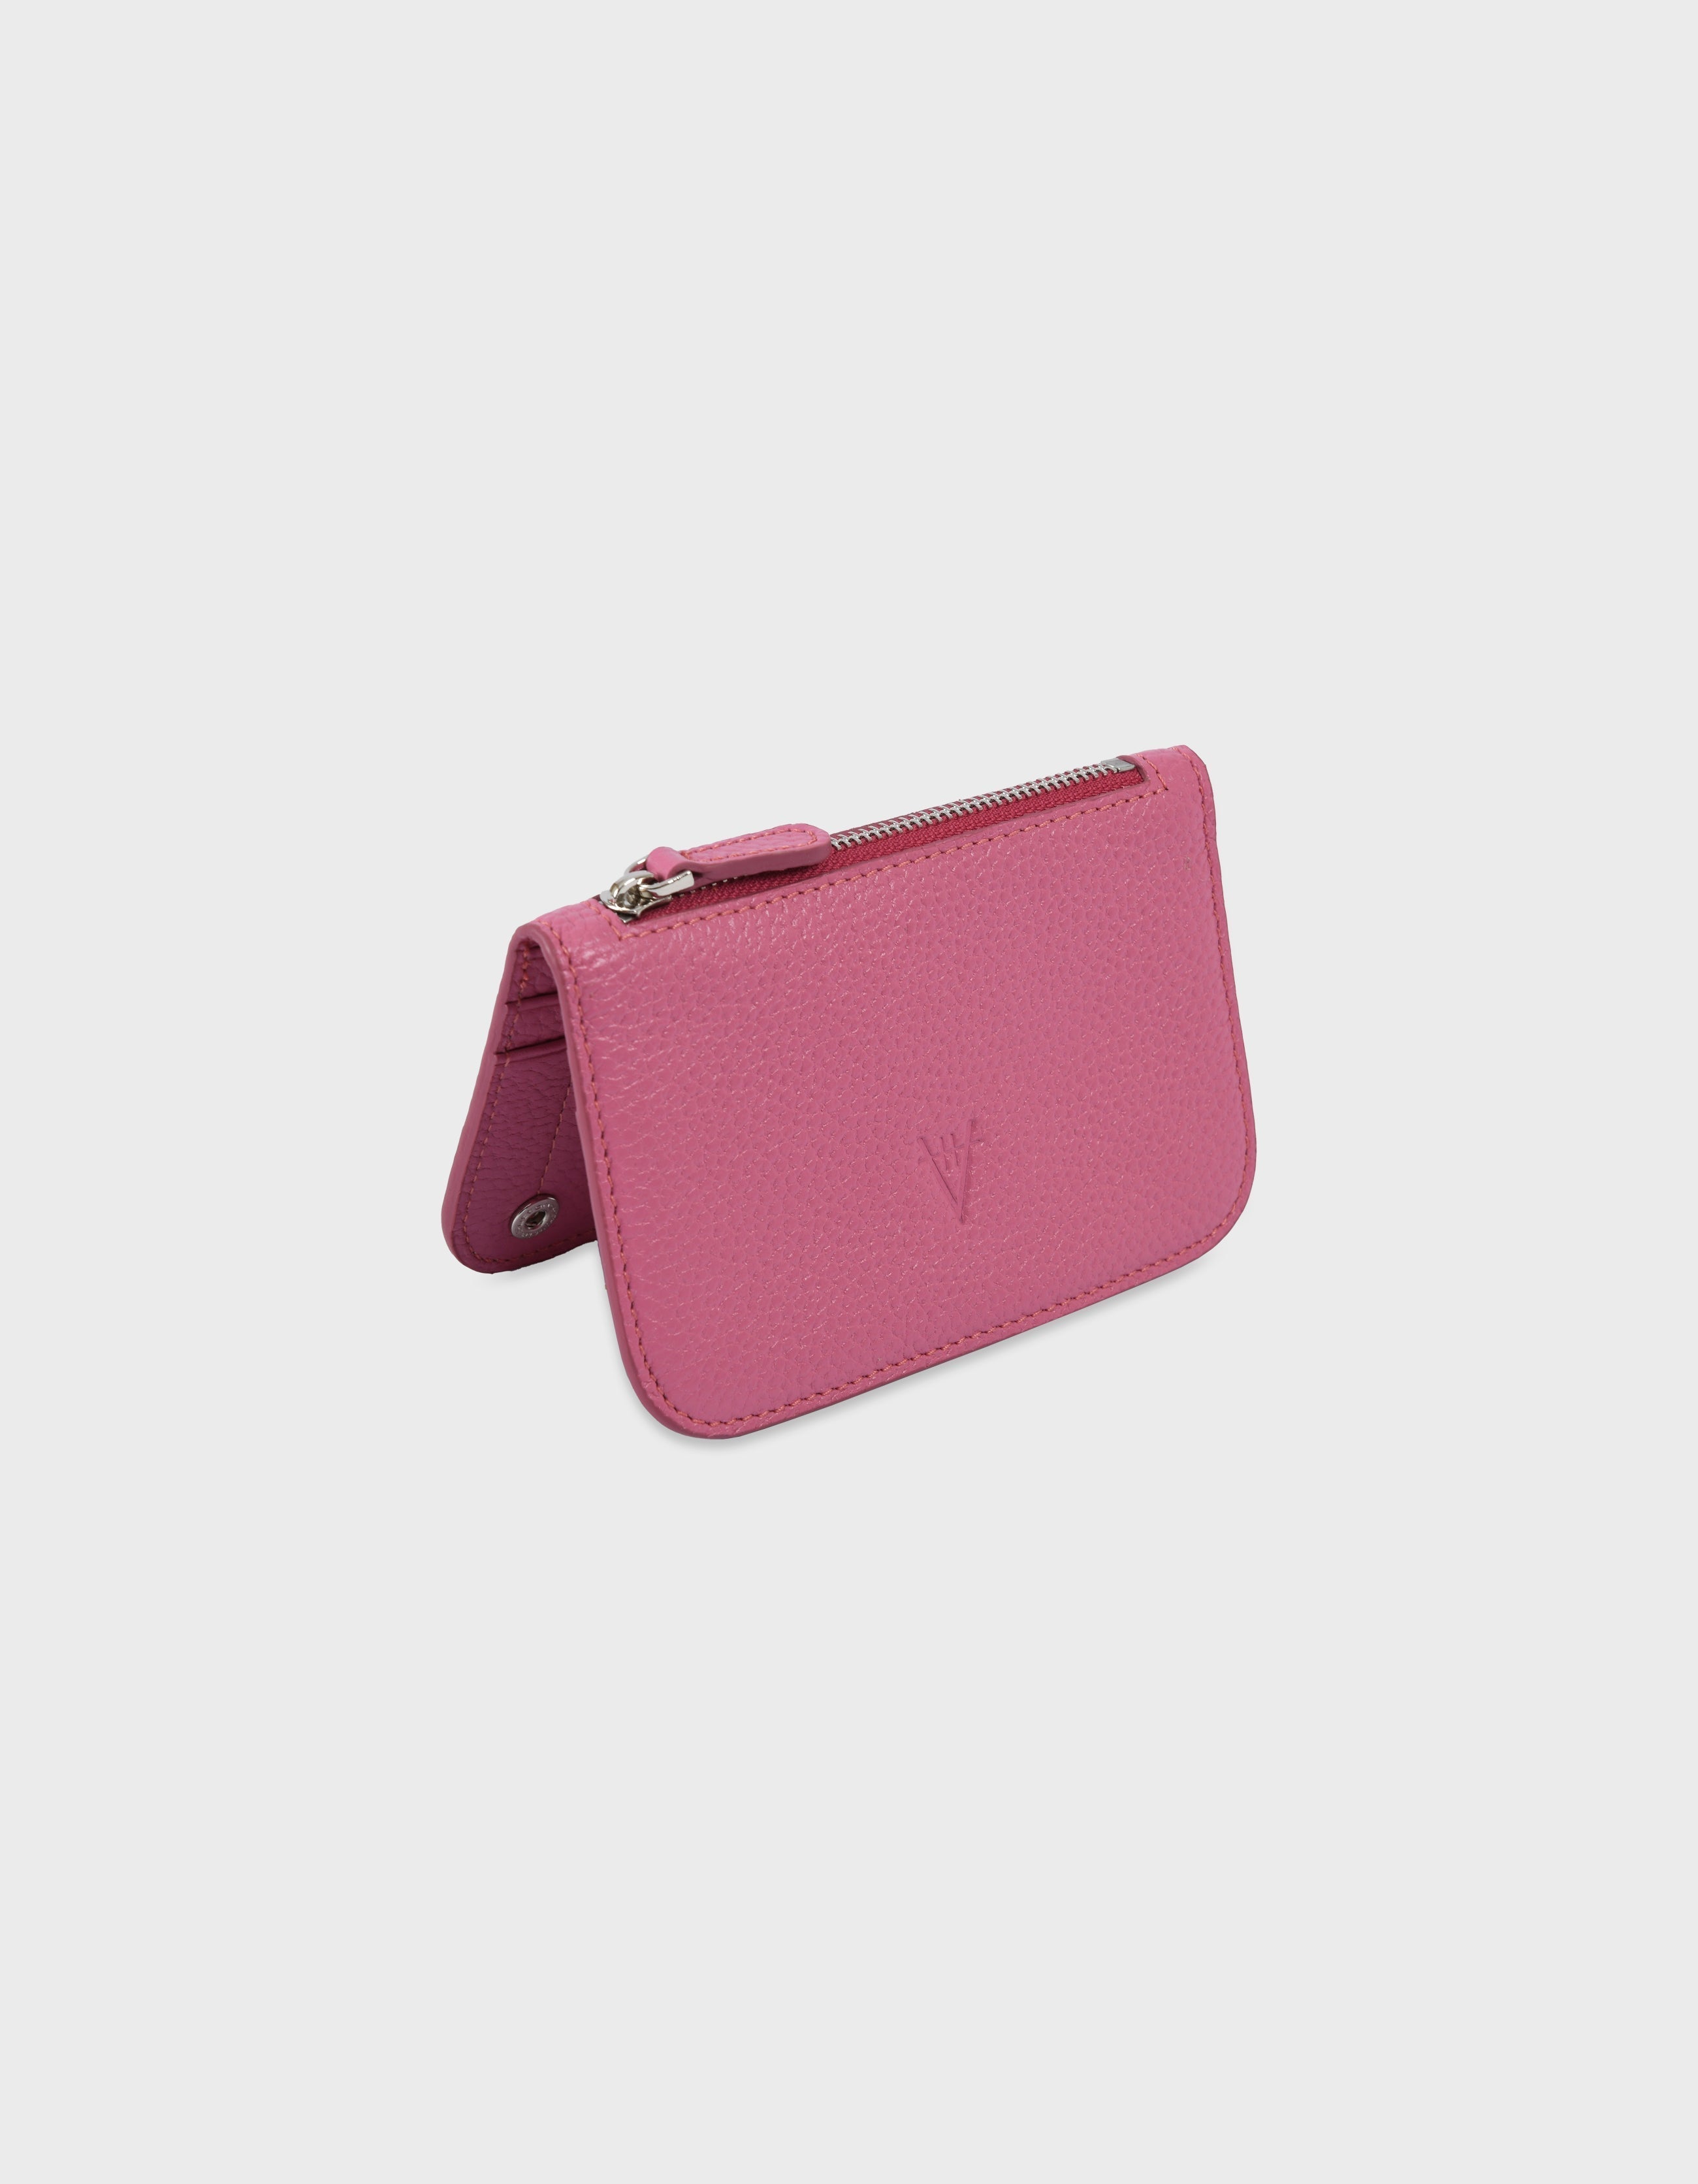 Hiva Atelier | Alae Coin Purse & Card Holder Pink Clay | Beautiful and Versatile